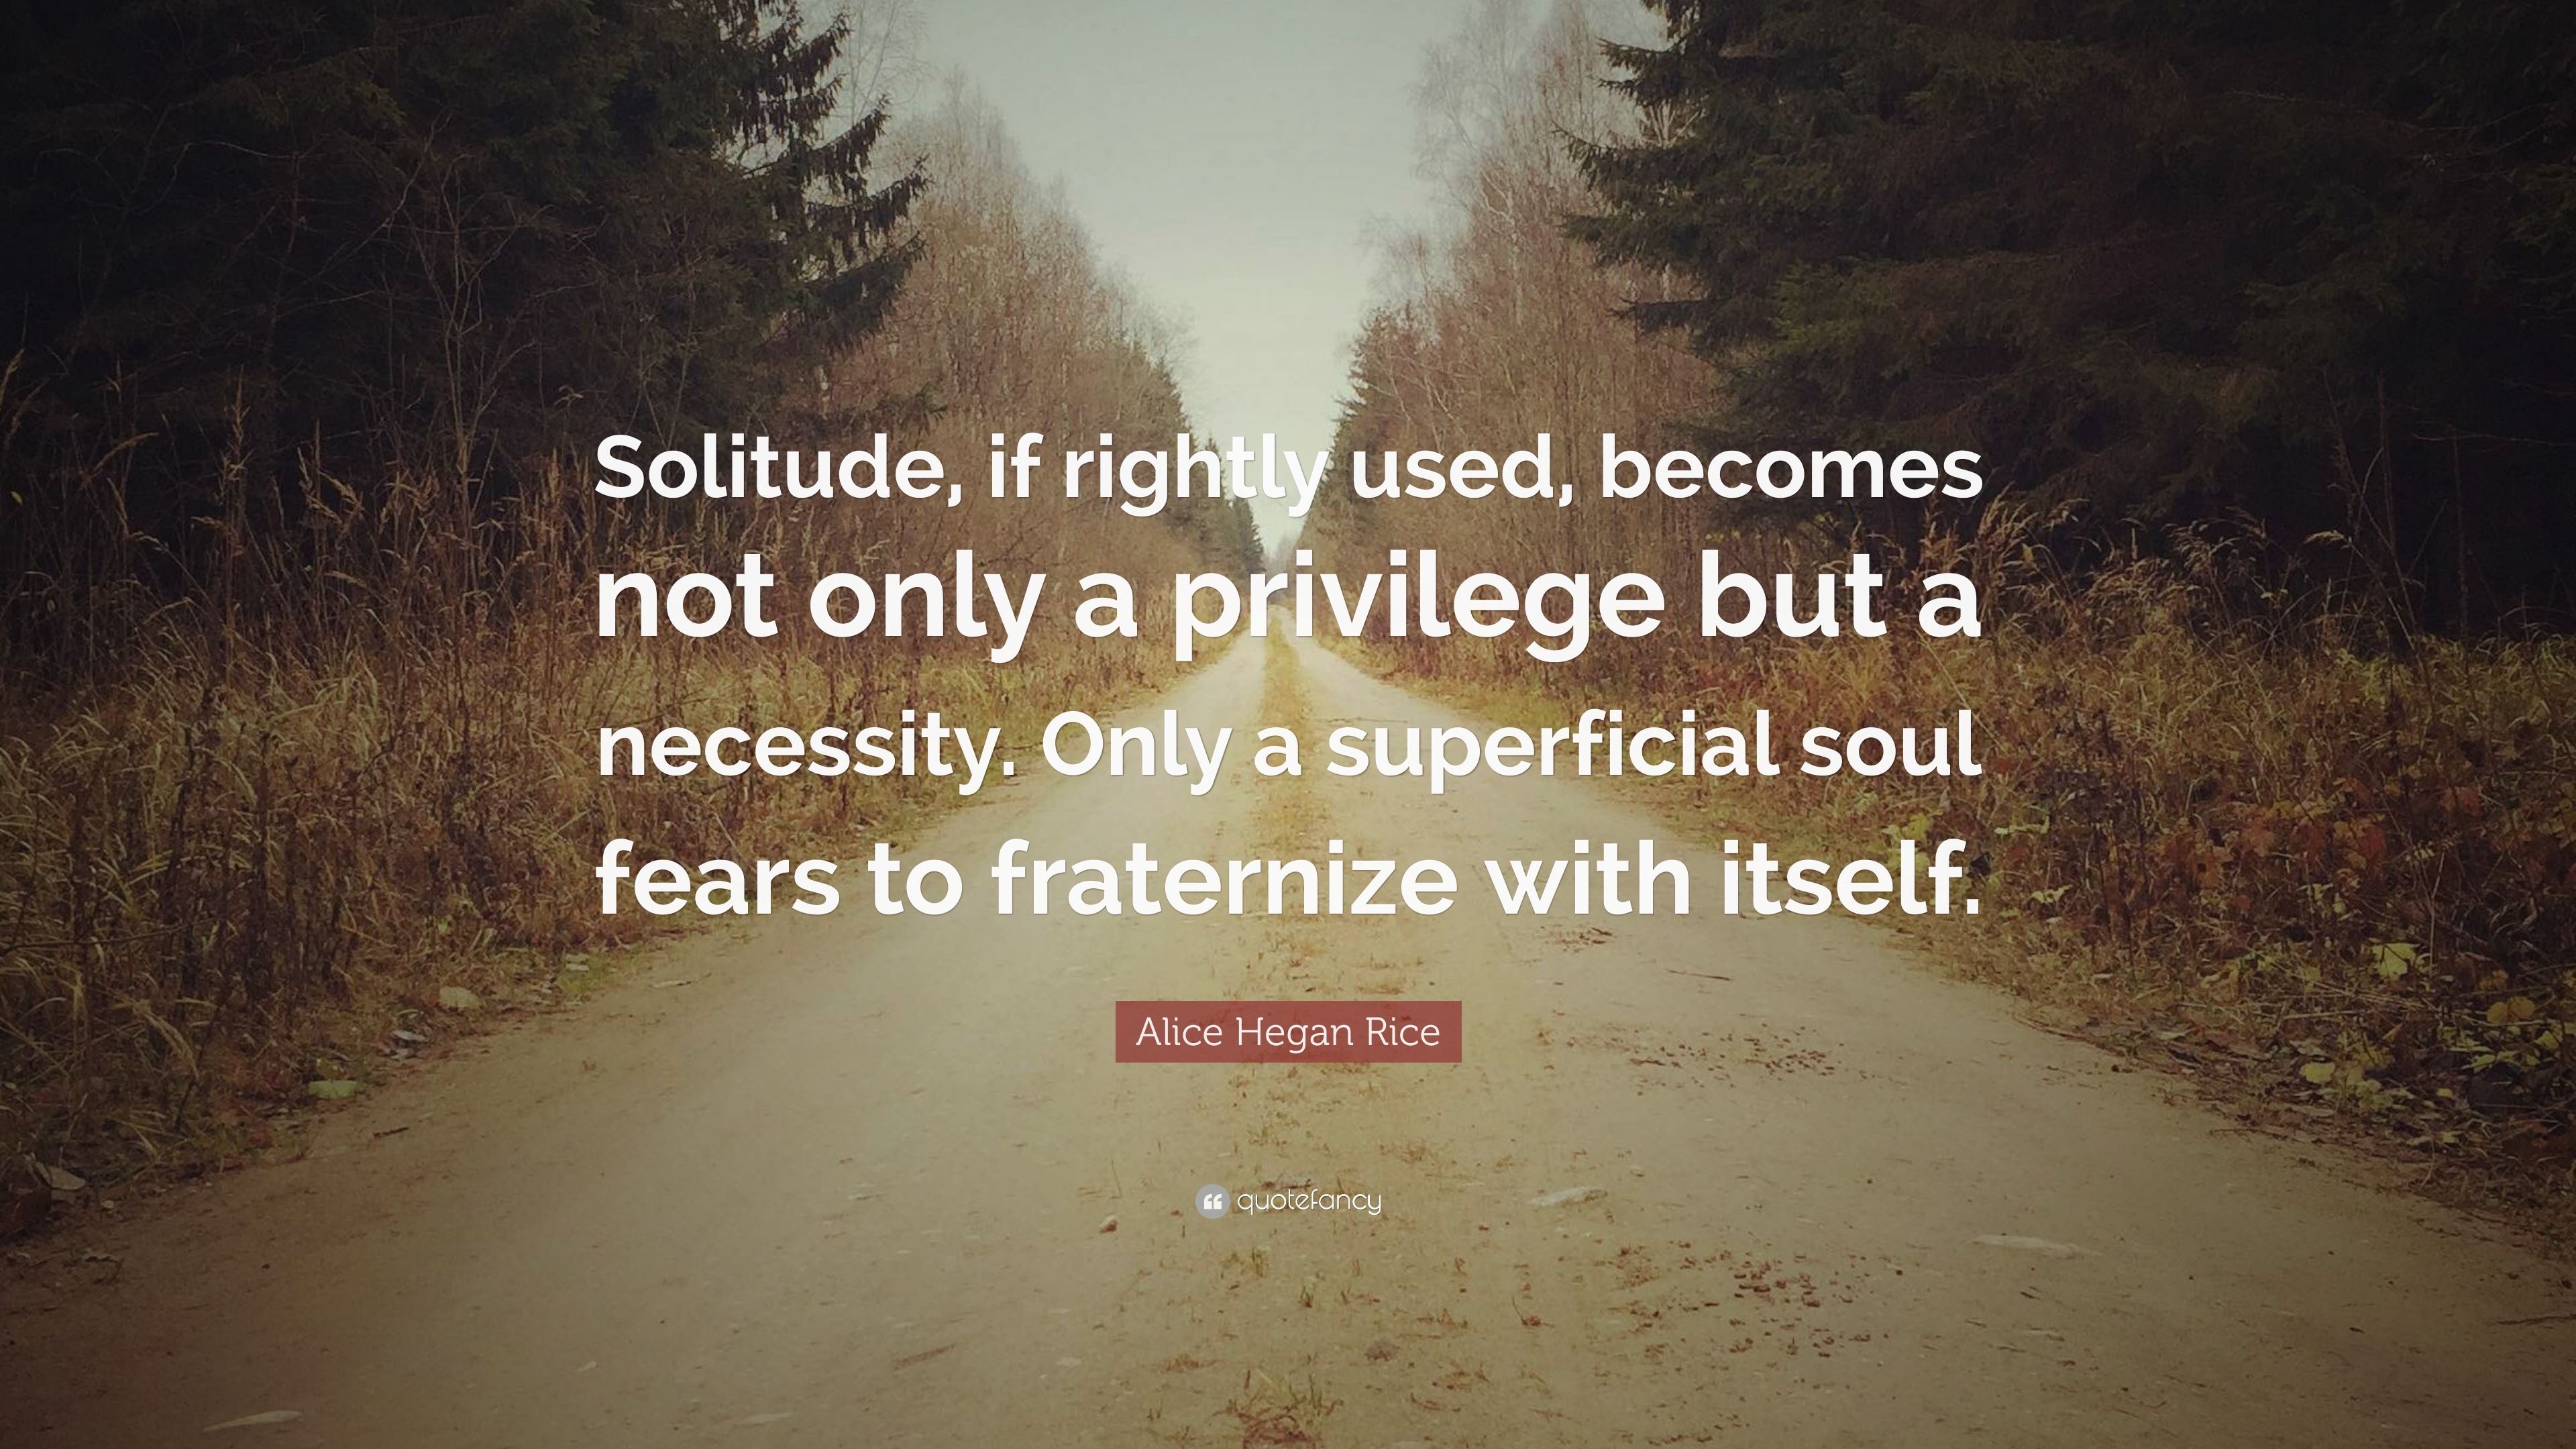 Alice Hegan Rice Quote: “Solitude, if rightly used, becomes not only a ...